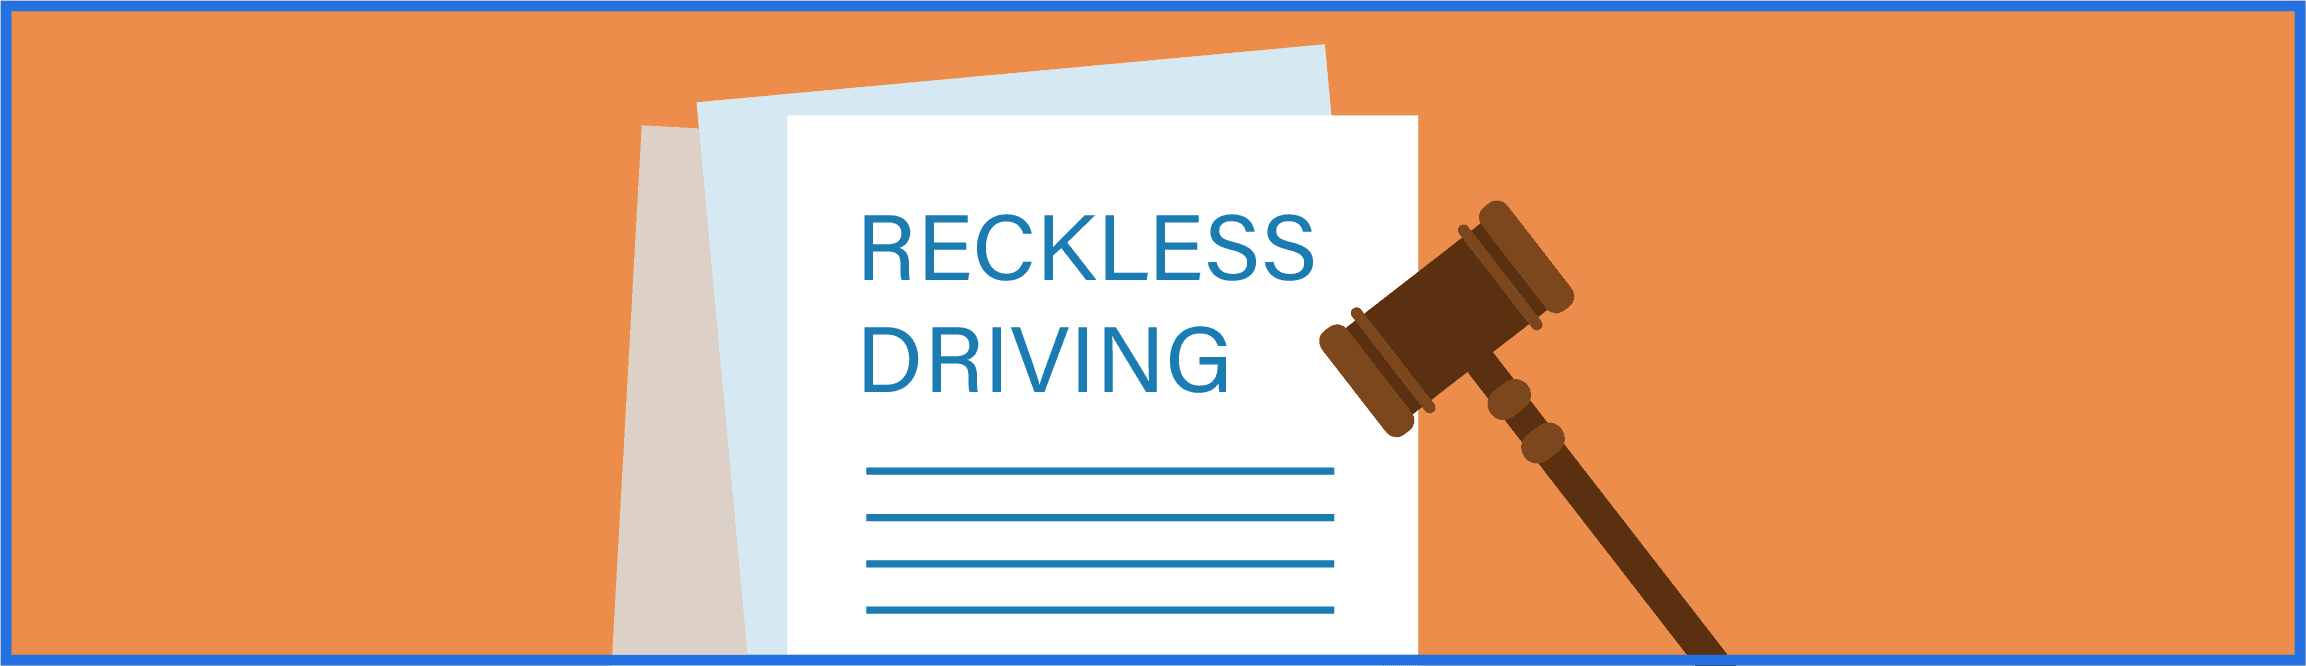 Penalties for Reckless Driving